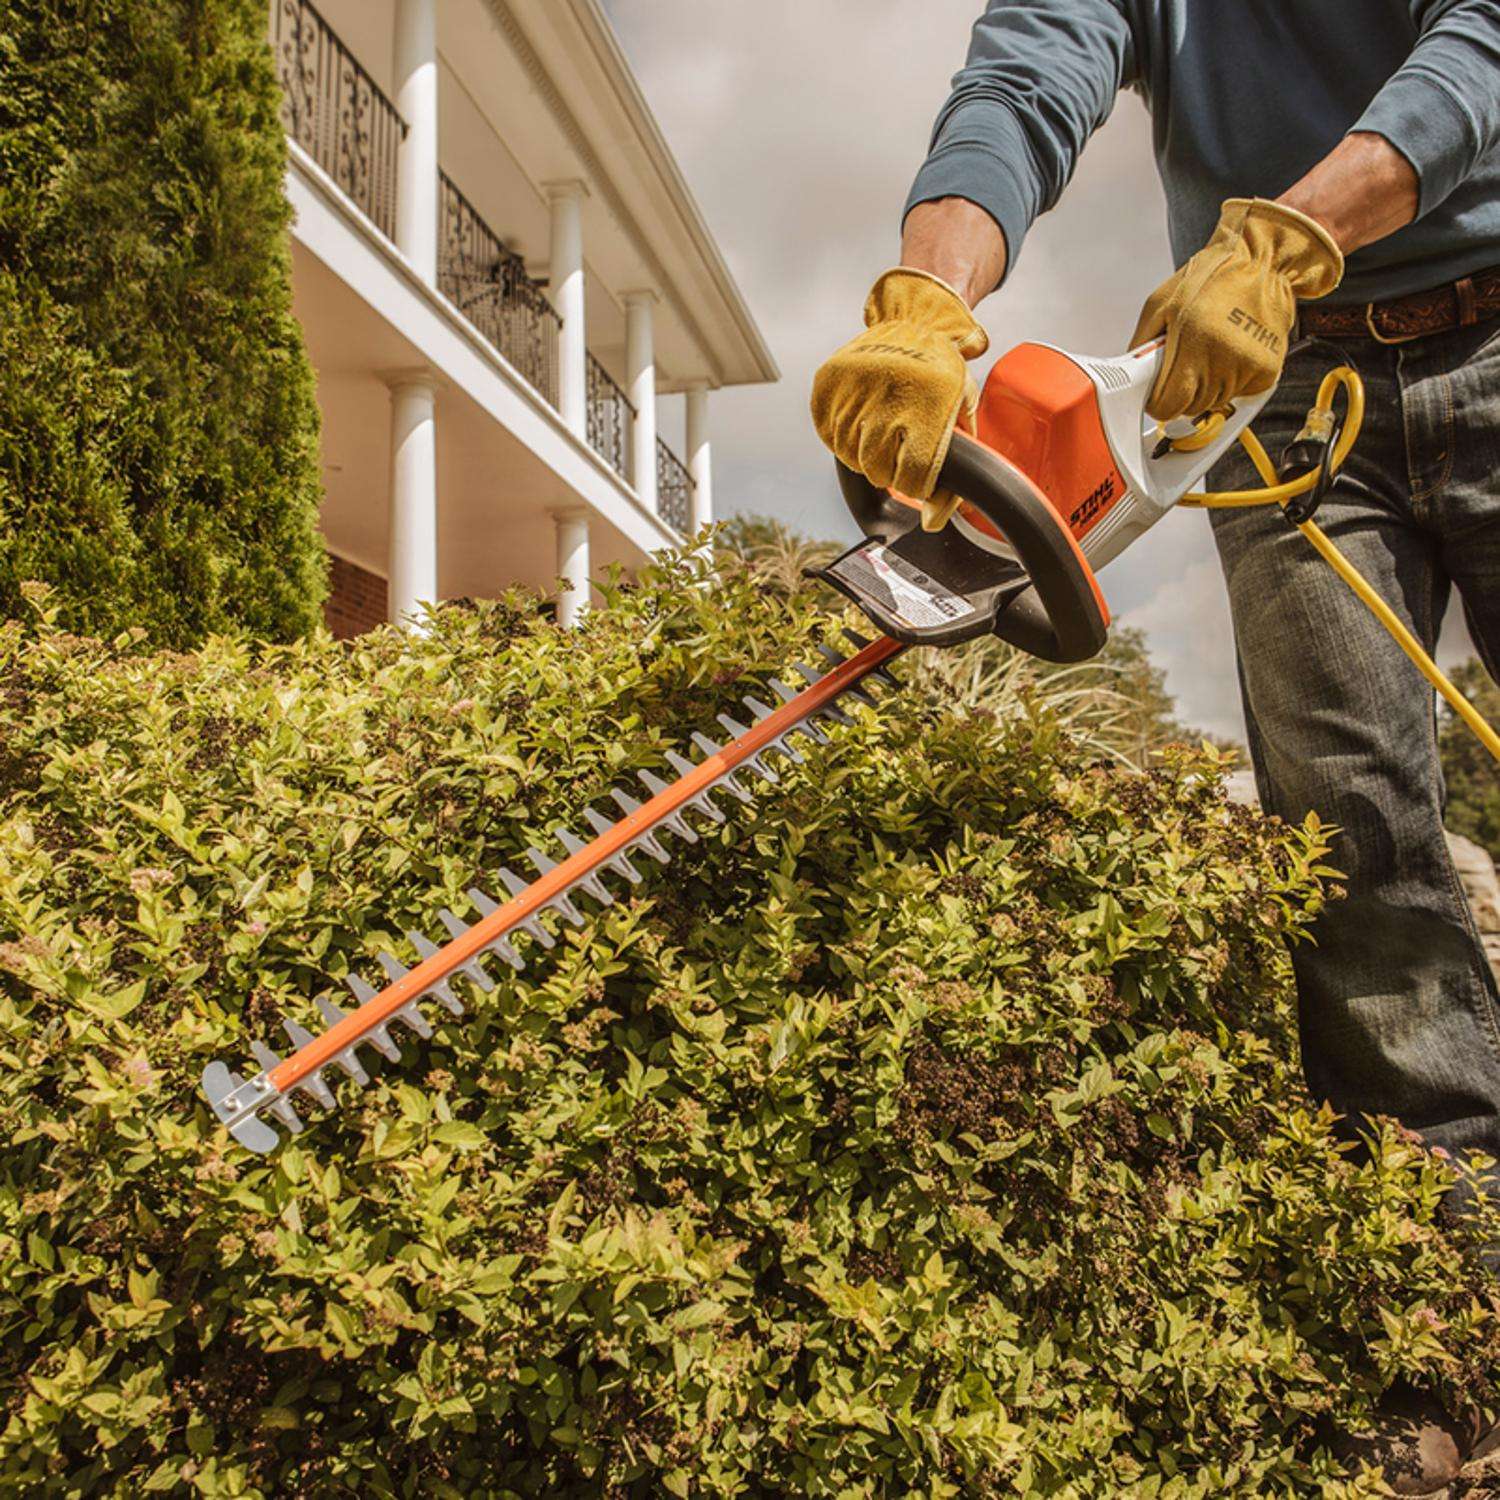 Hyper Tough 20V Max 22-inch Cordless Hedge Trimmer,Dual-action